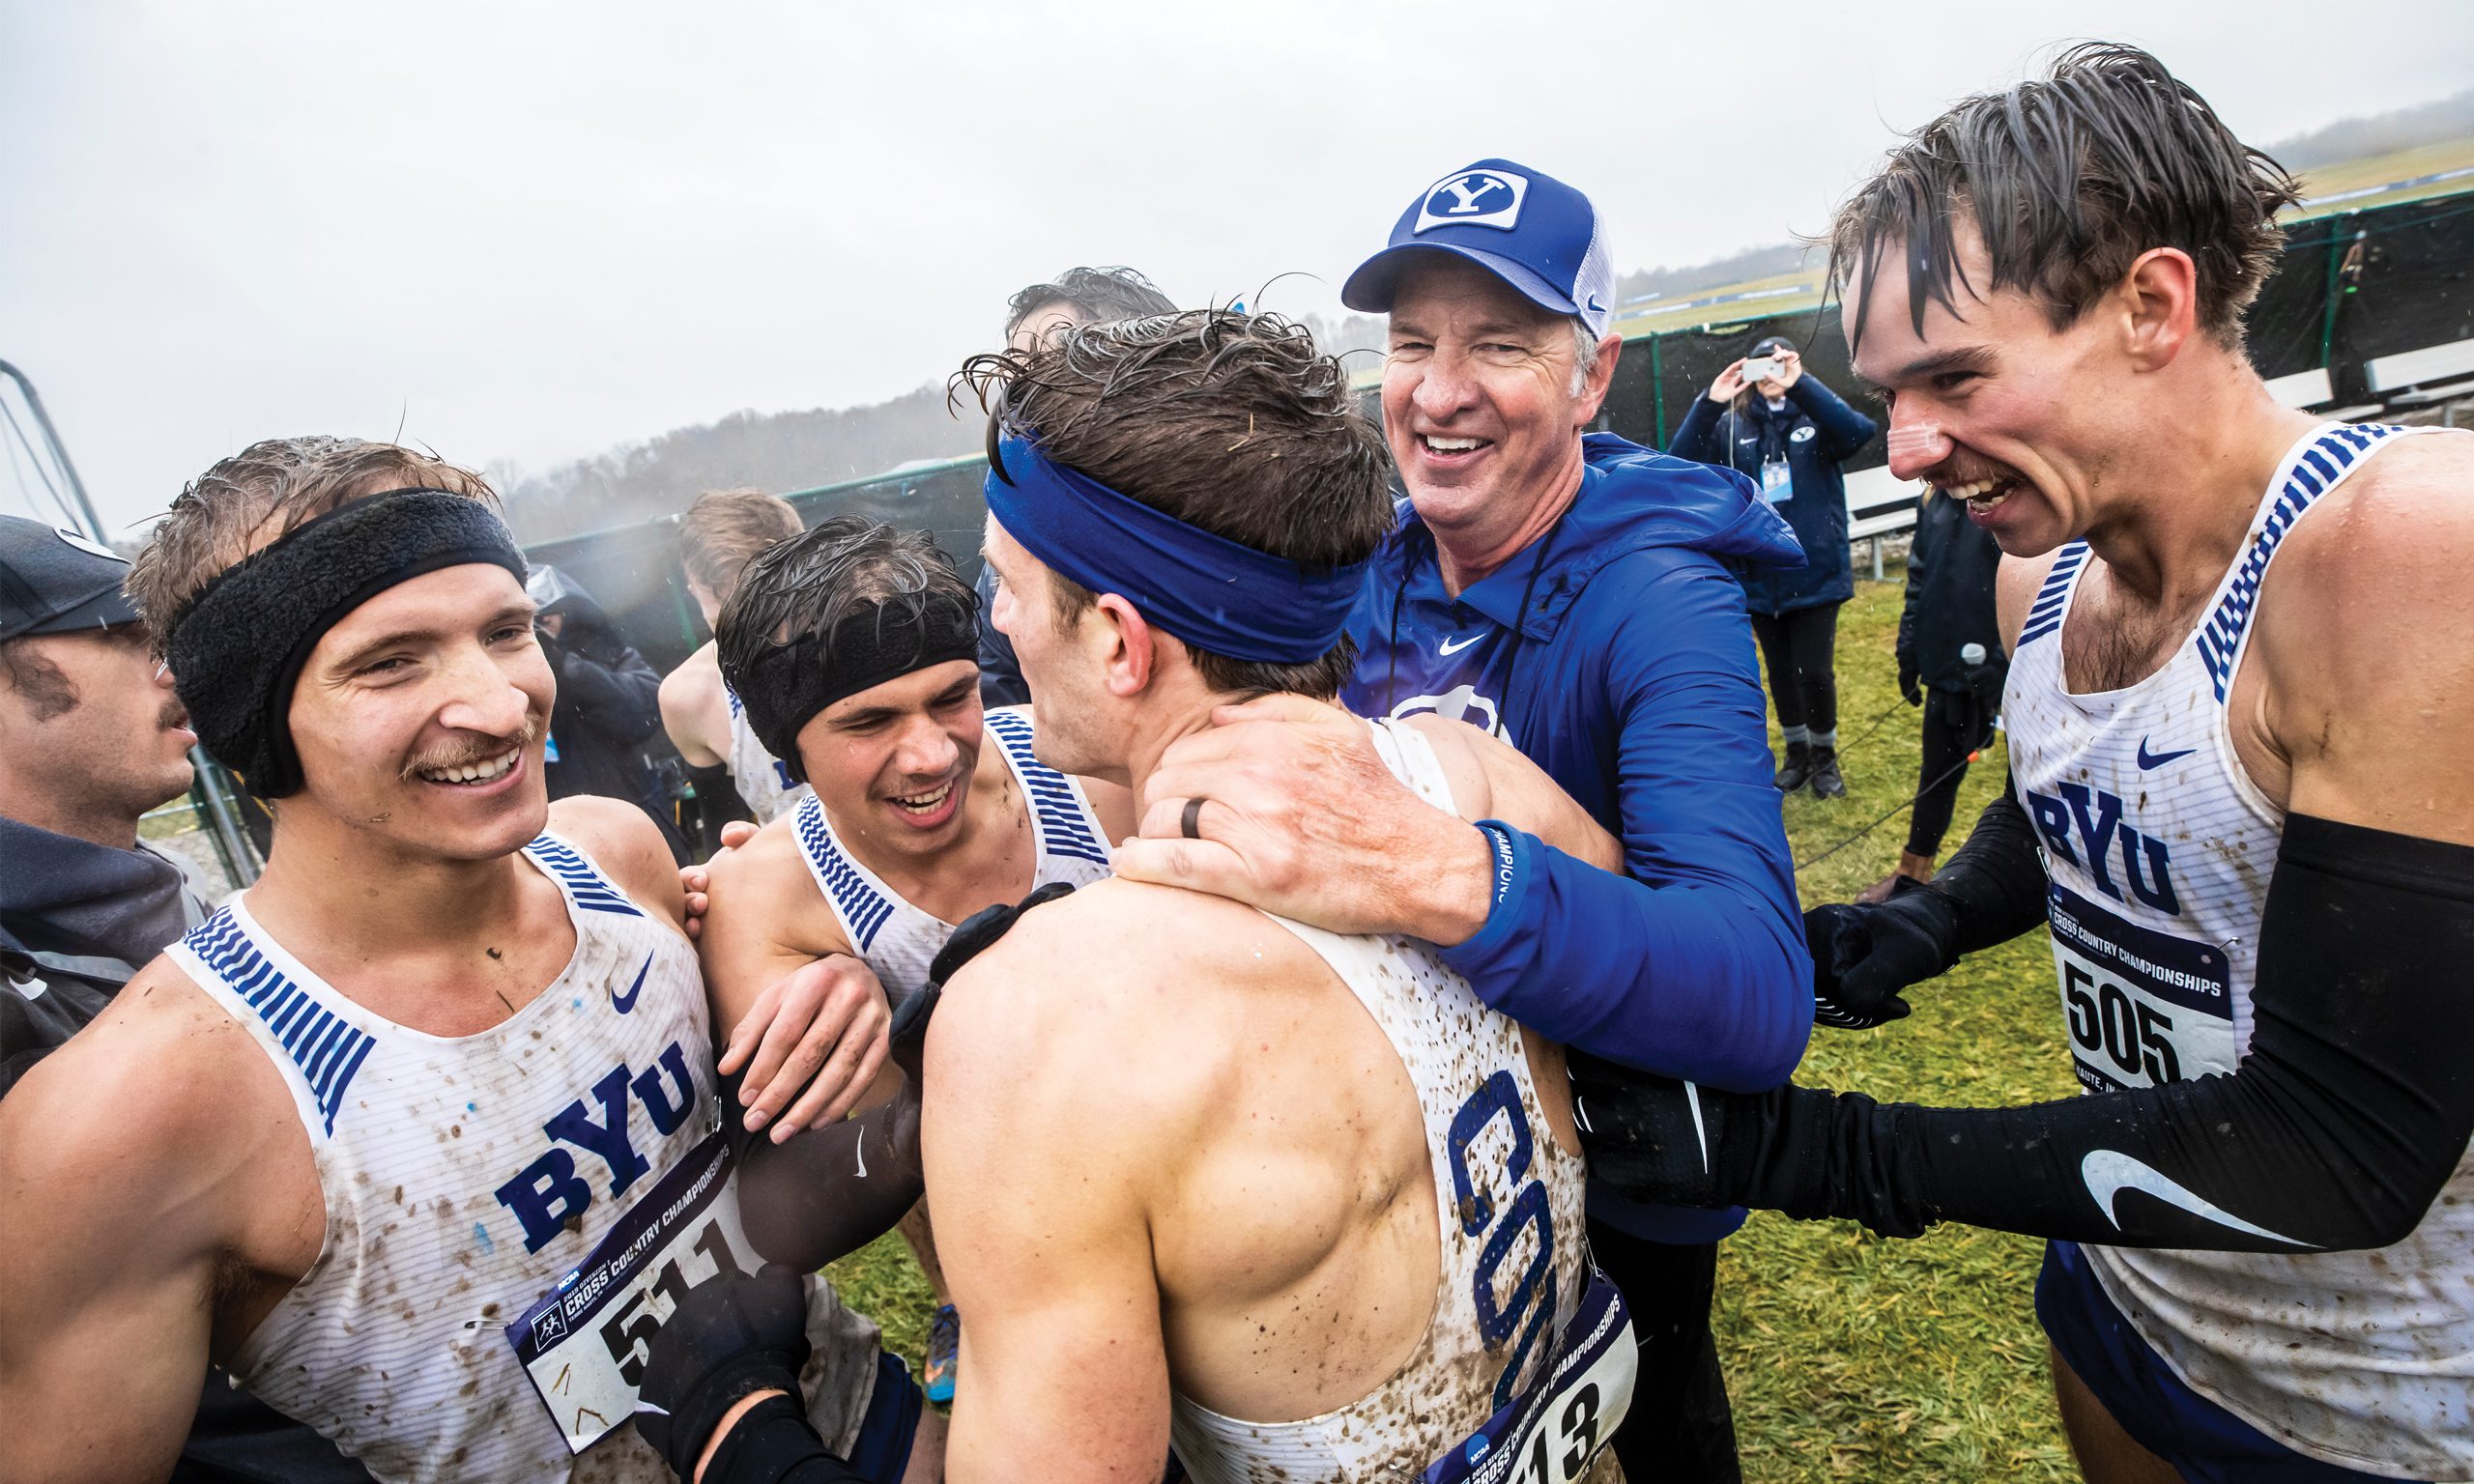 The 2019 BYU men's cross country team celebrates their victory after a wet and muddy national championship race.